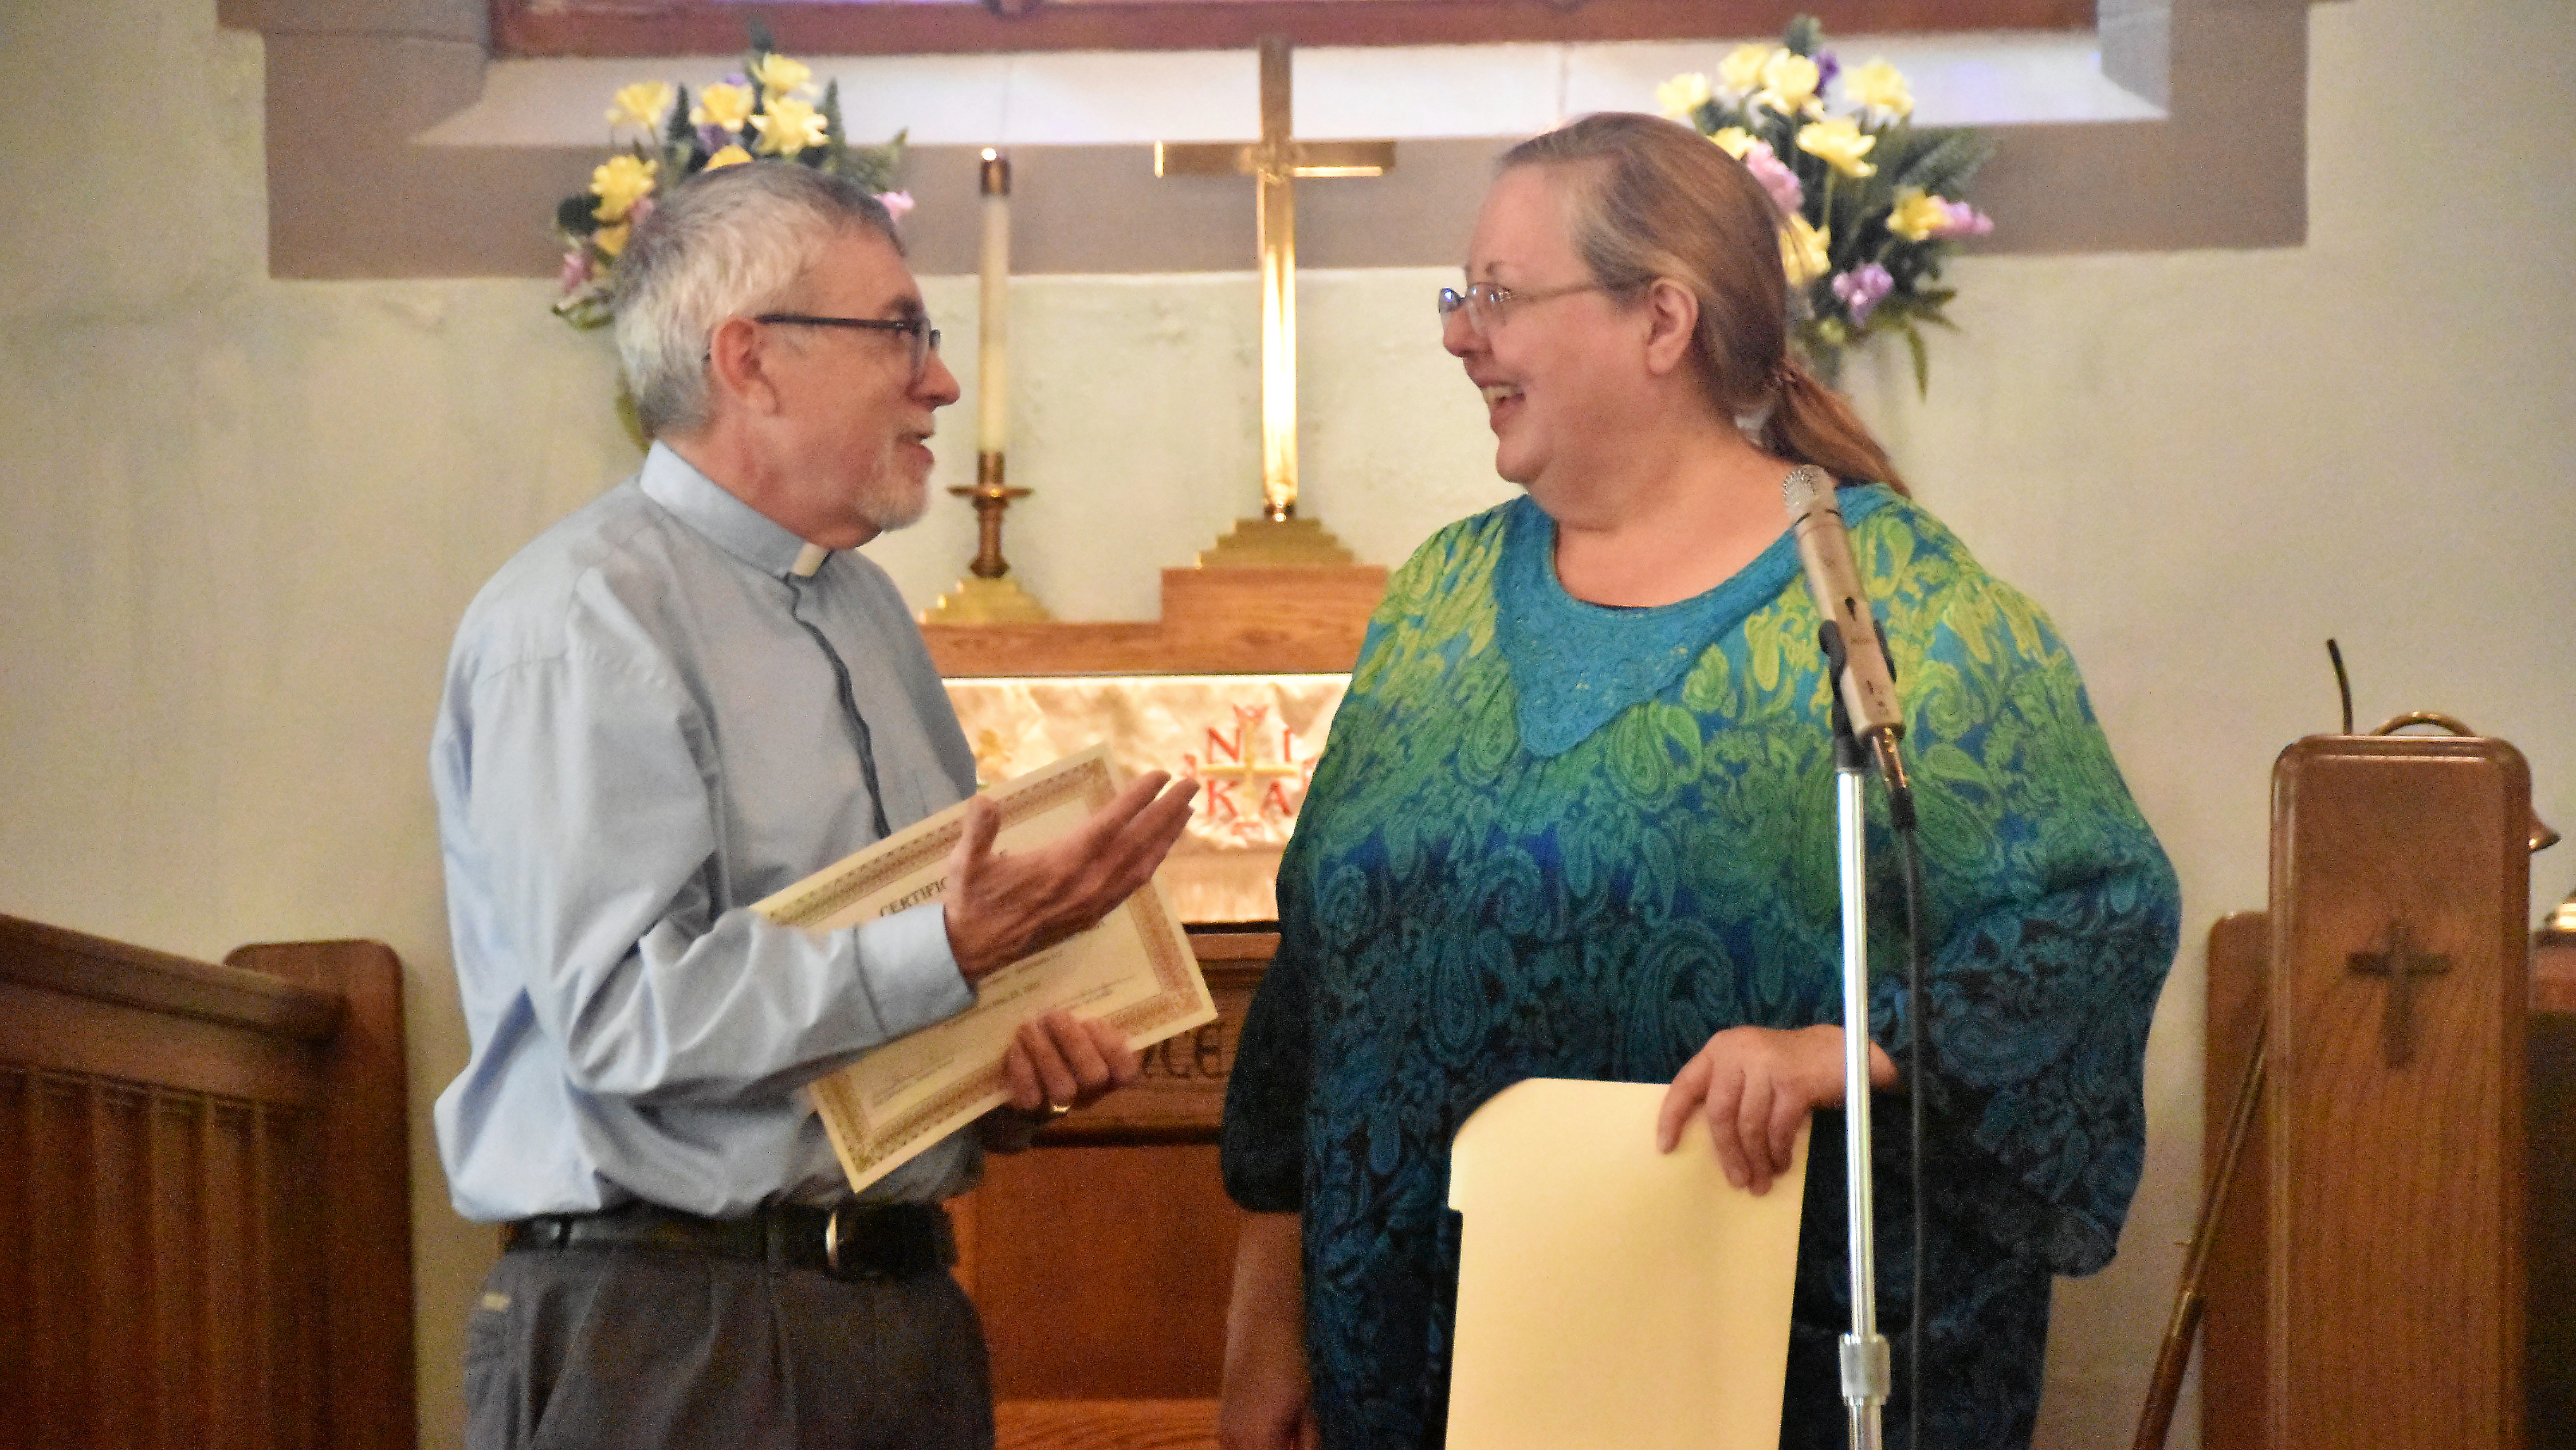 Featured image for “Church grateful for flood recovery aid from partner churches”